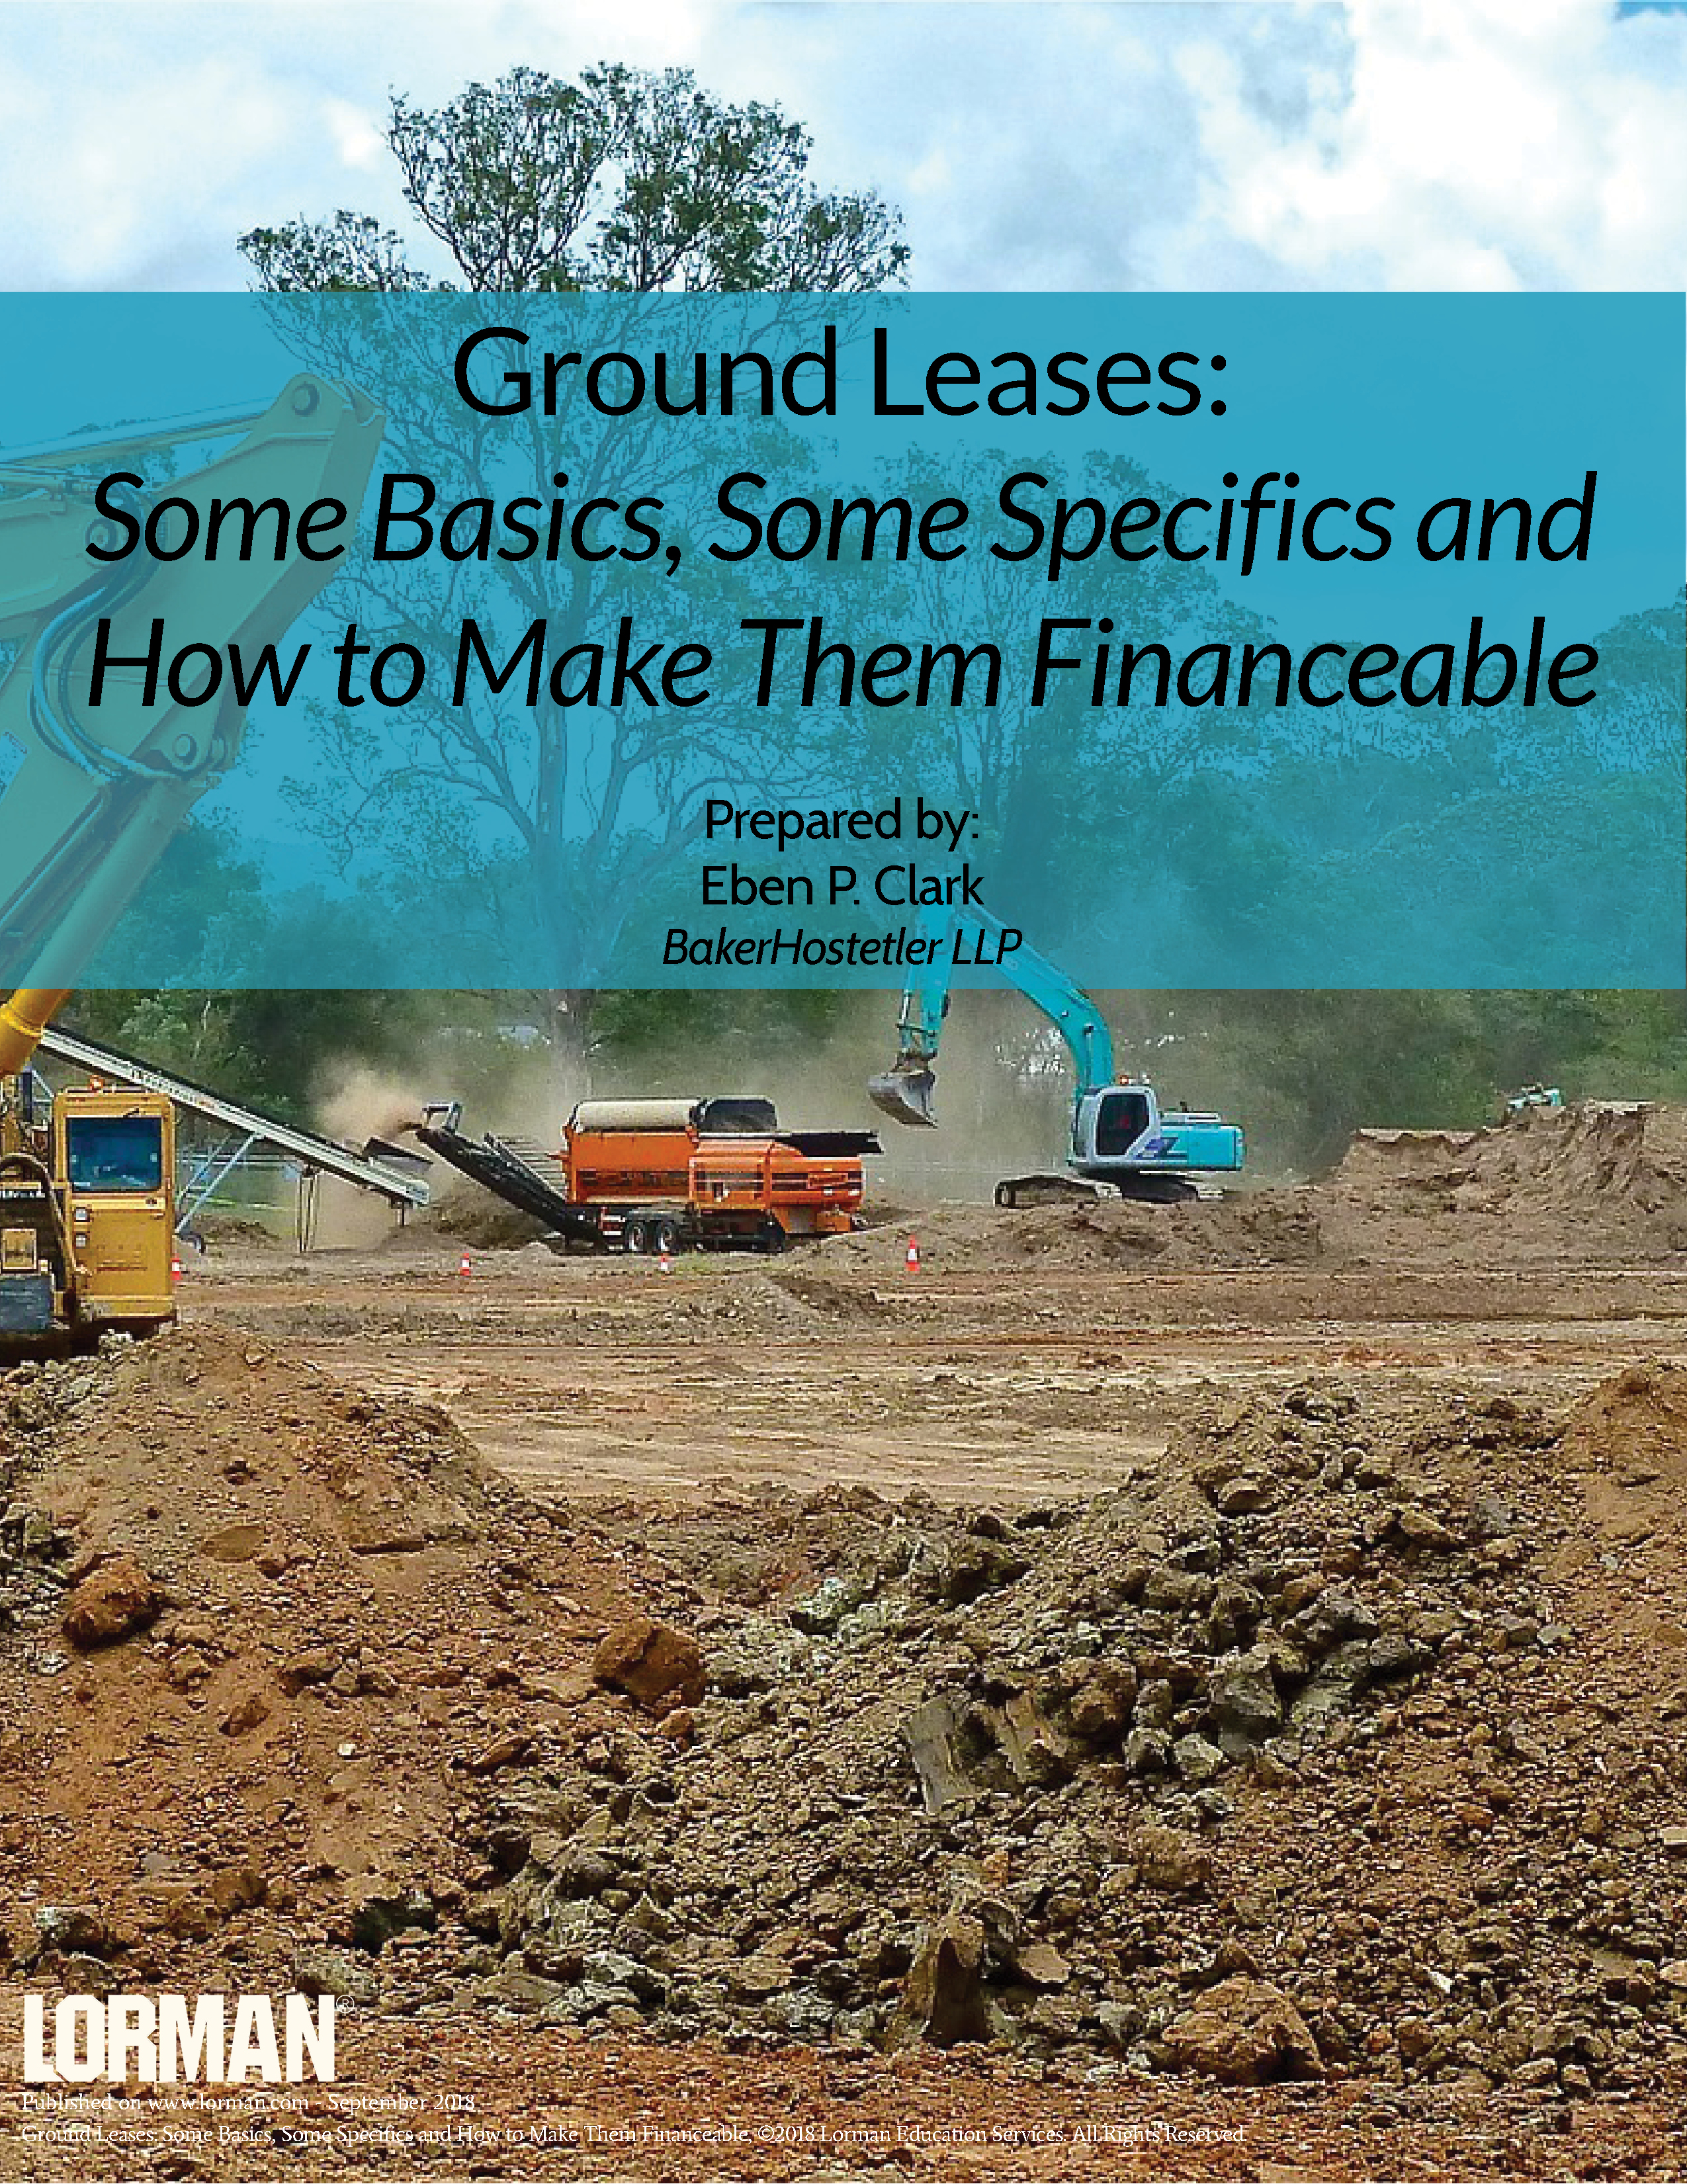 Ground Leases: Some Basics, Some Specifics and How to Make Them Financeable